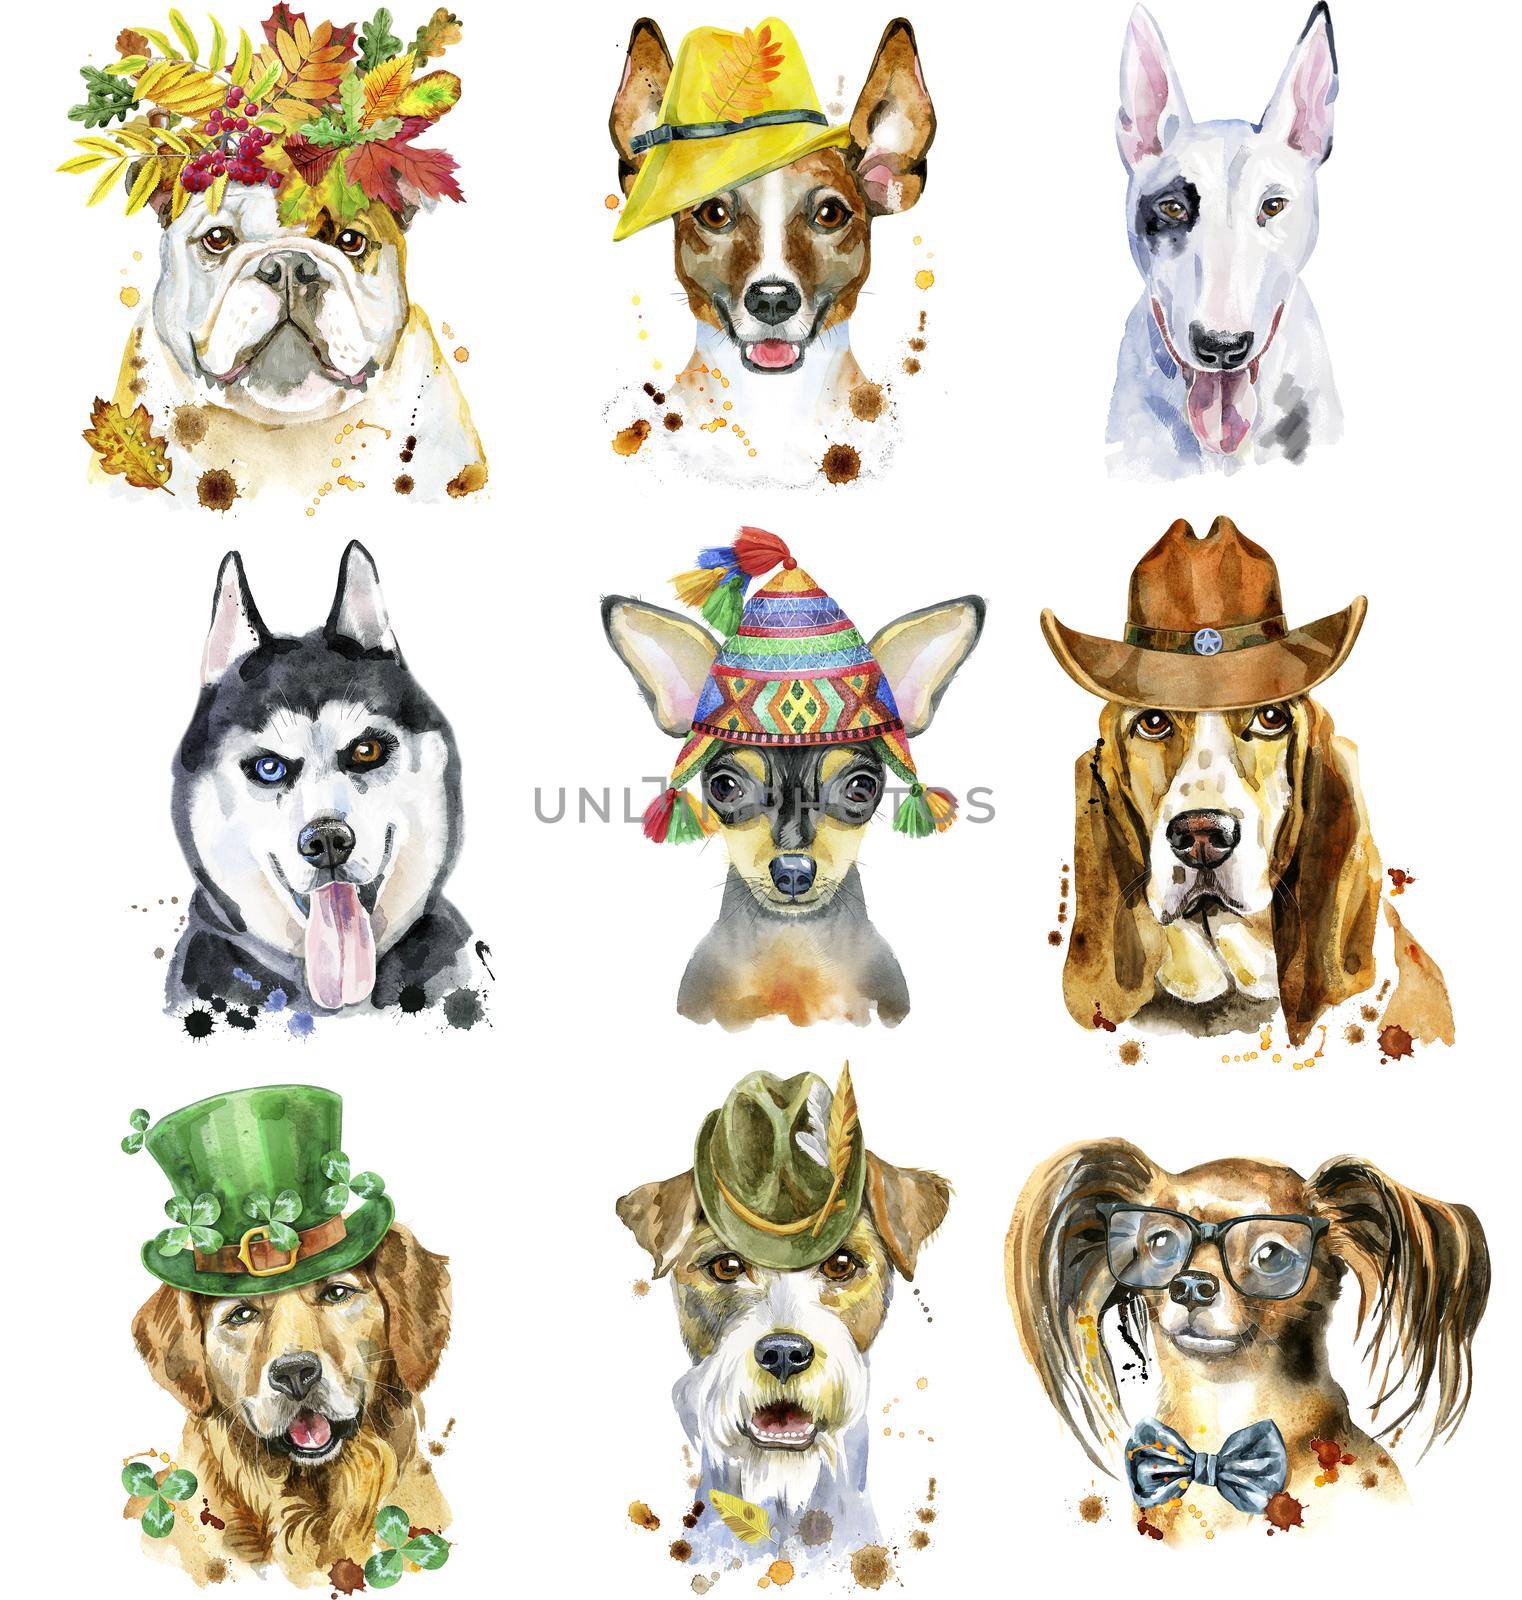 Cute set of watercolor portraits of dogs. For t-shirt graphics. Watercolor dogs illustration